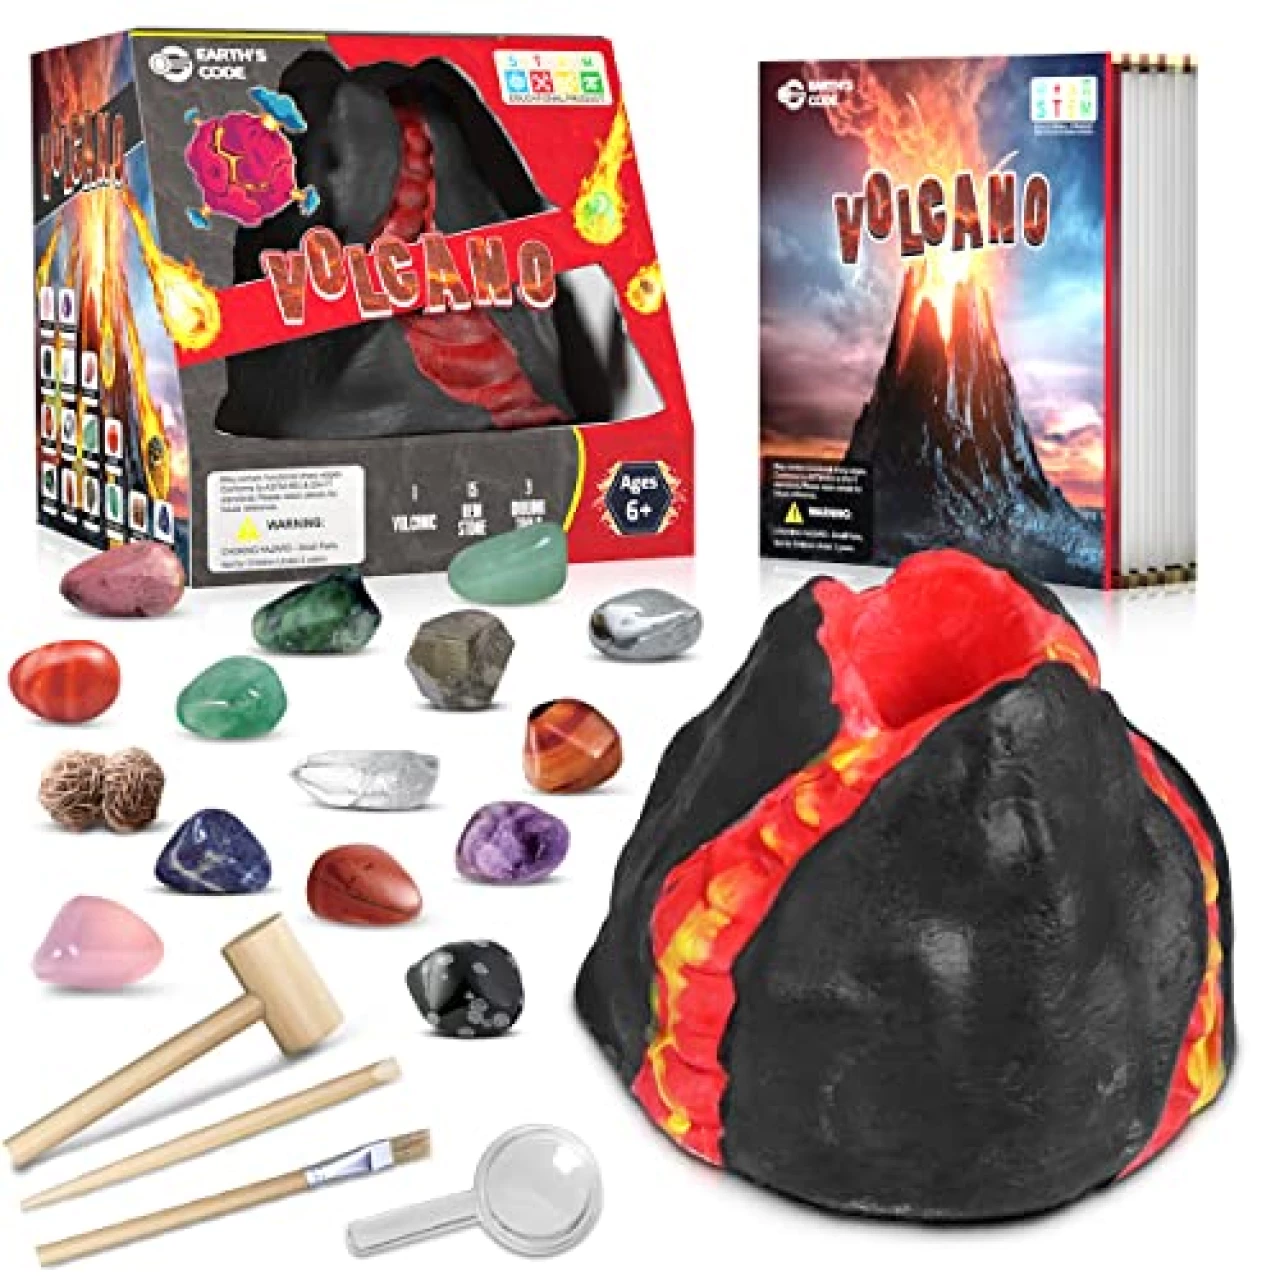 Gemstone Dig Kit, Volcano Kit for Kids 6-12 Year Old - Dig Up 15 Real Gems and Crystals Dig Pack Diamond Dig It Science STEM Activities Educational Toys Gifts for Boys &amp; Girls Age 6-8 8-12